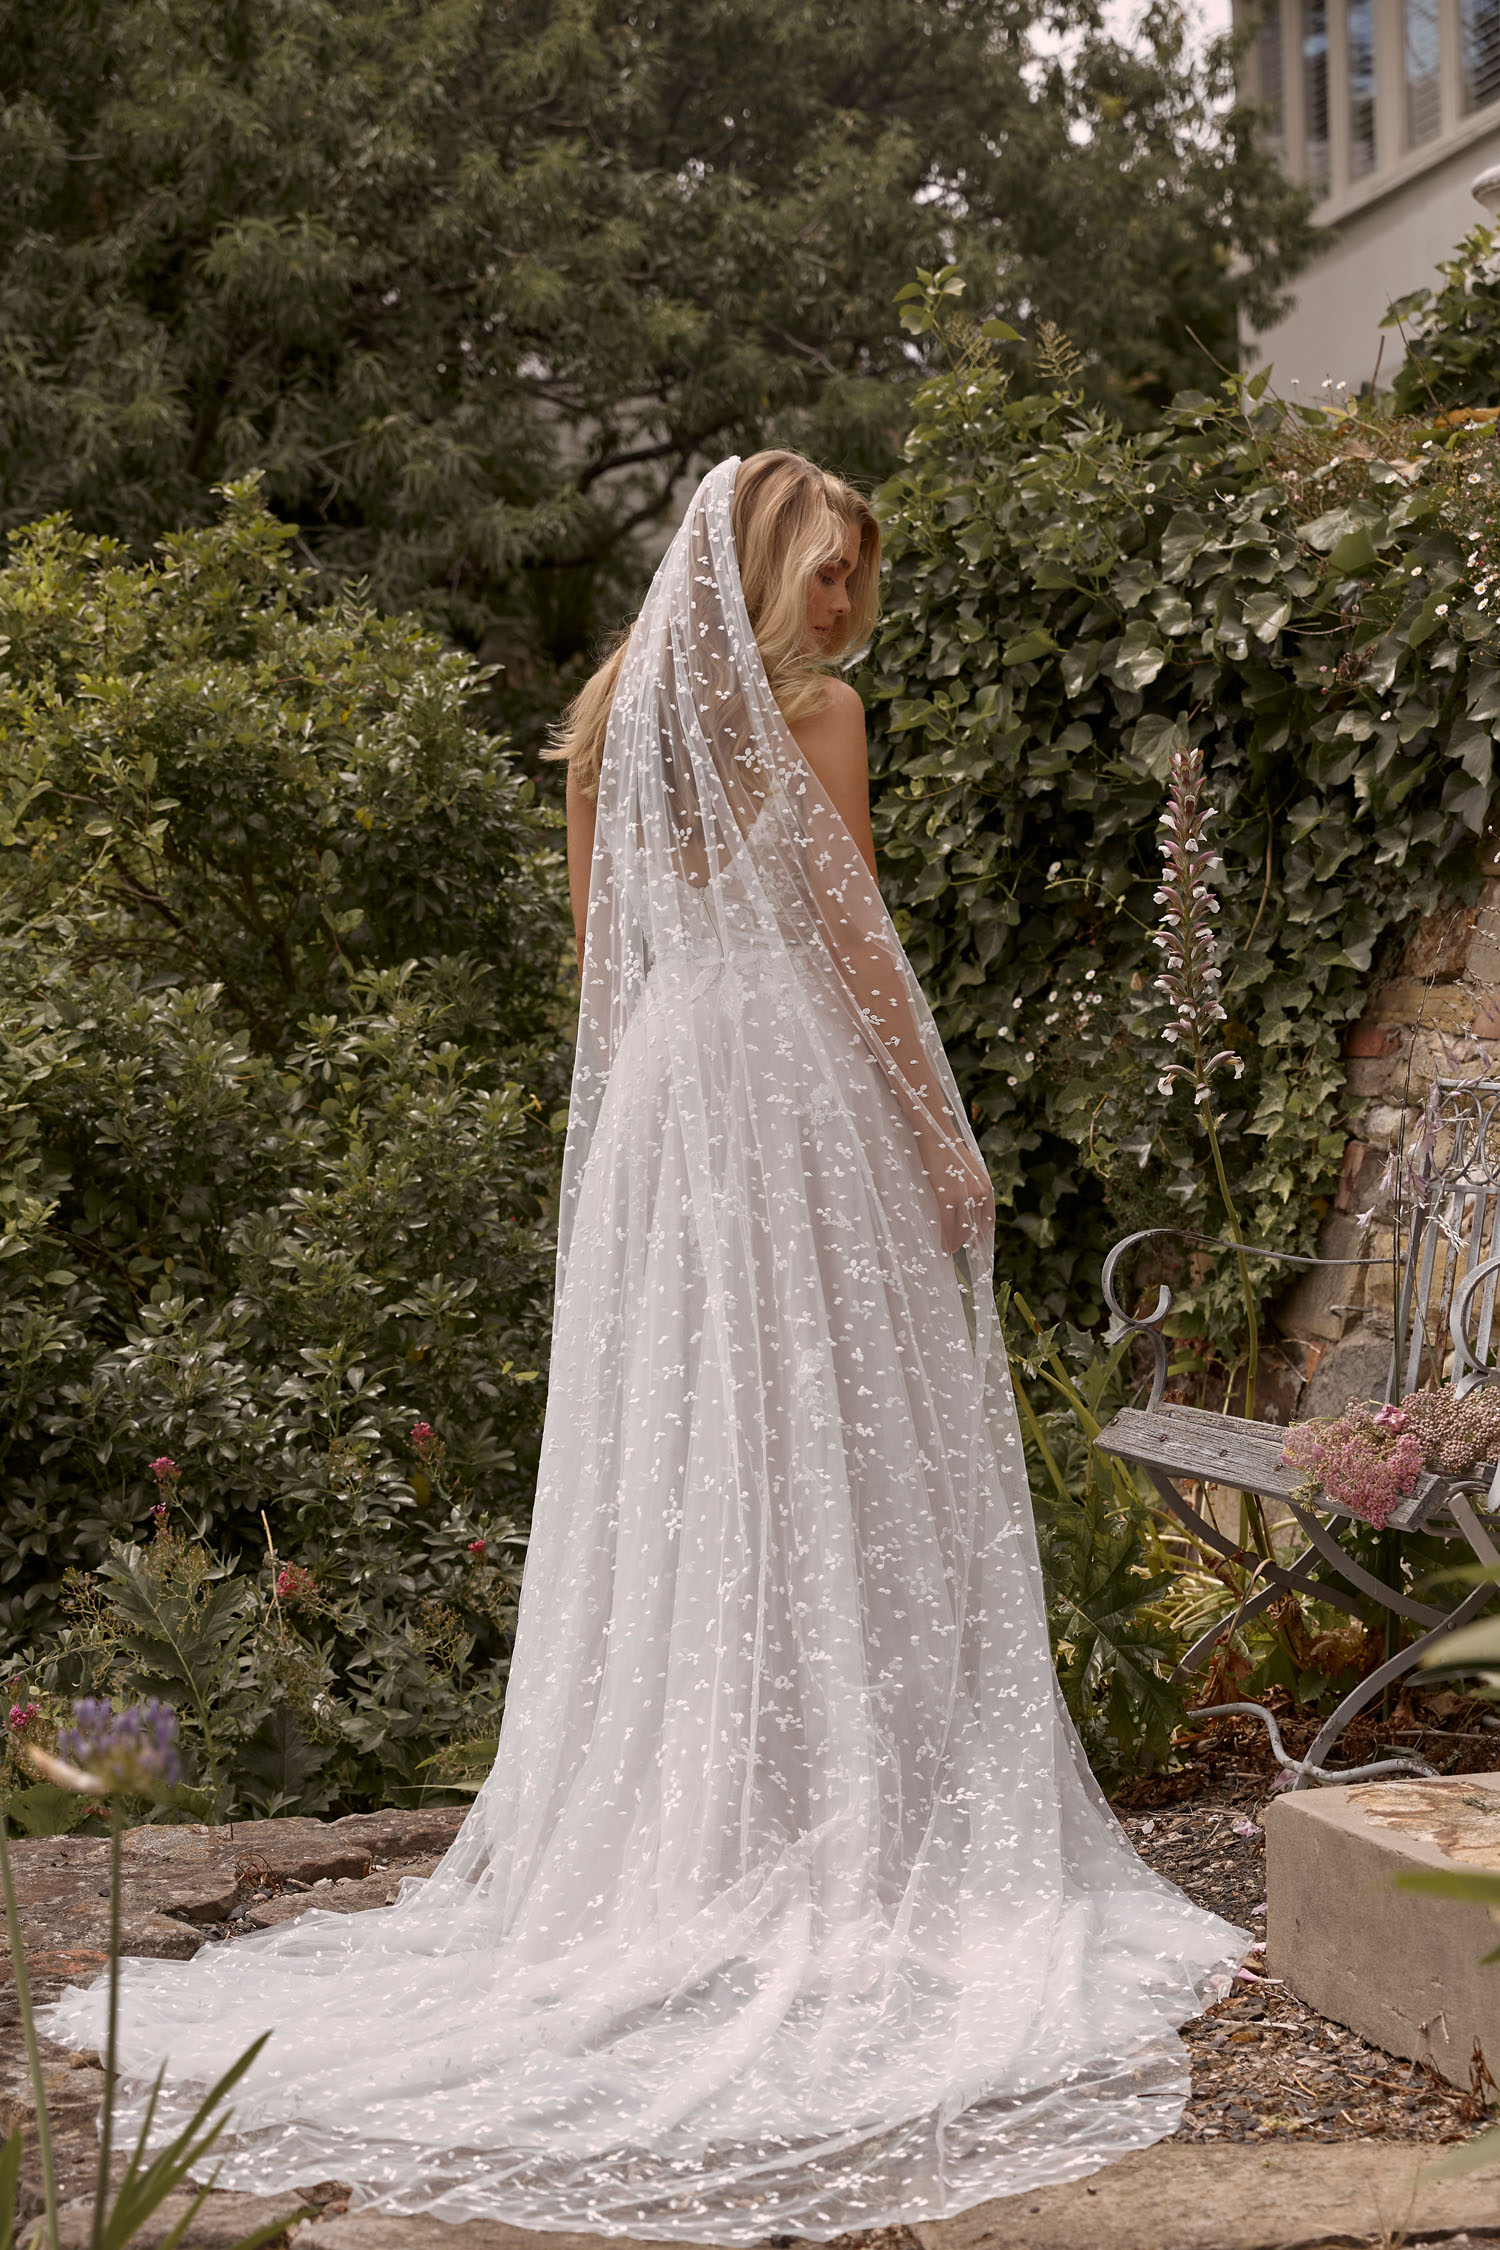 https://madilane.com/wp-content/uploads/2021/06/CATE-ML20033-FULL-LENGTH-A-LINE-FLORAL-LACE-AND-SPOTTED-TULLE-THIN-STRAPS-V-ILLUSION-BACK-ZIPPER-MATCHING-VEIL-WEDDING-DRESS-MADI-LANE-BRIDAL-10.jpg